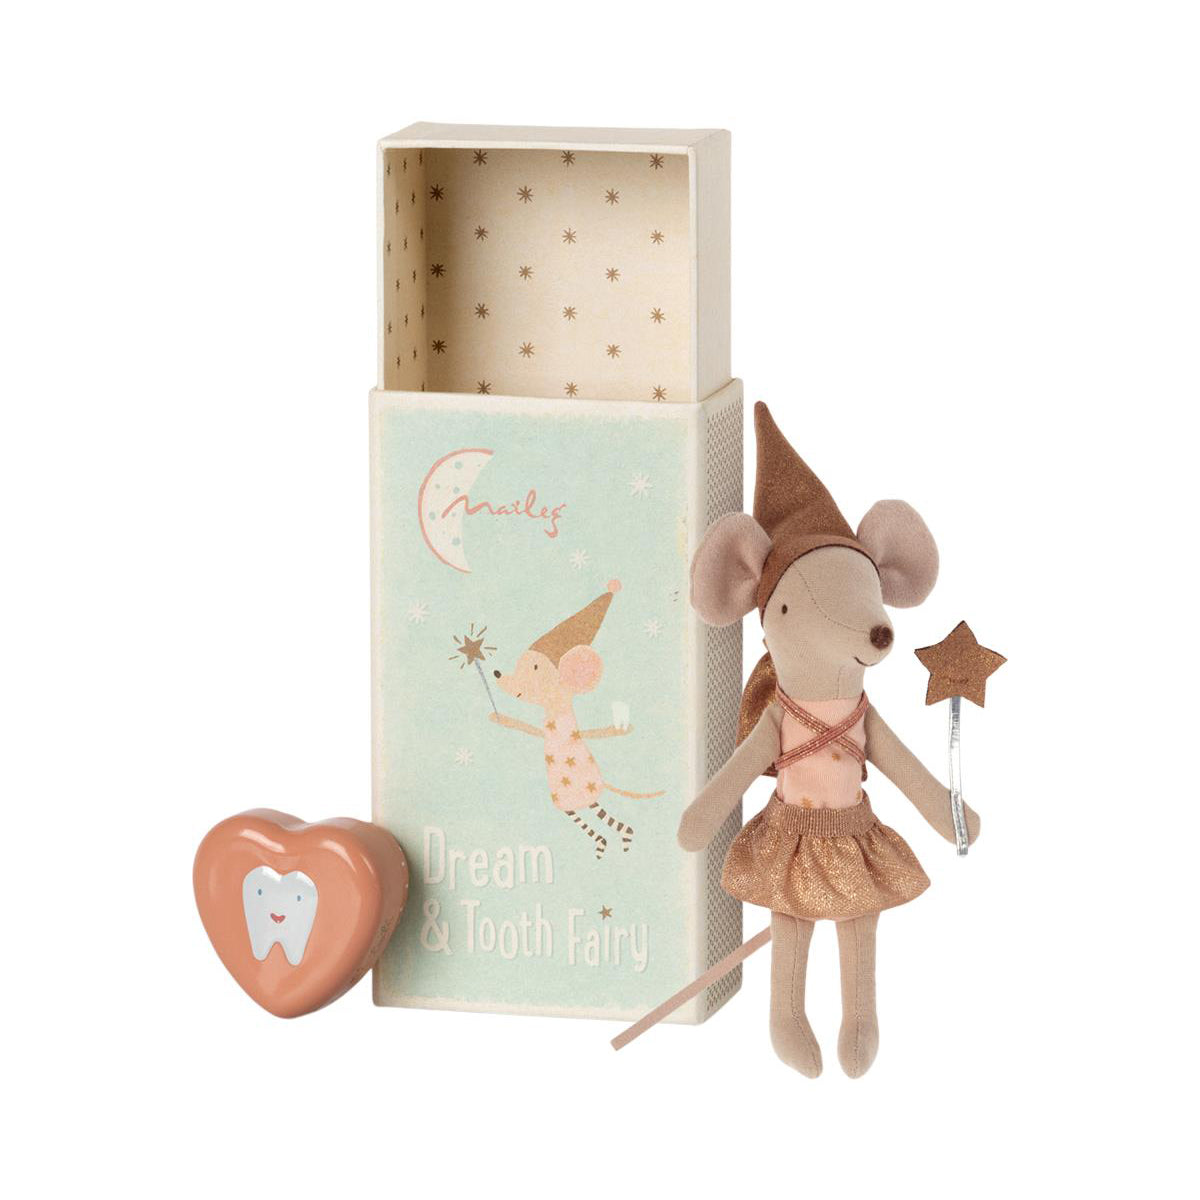 Maileg Tooth fairy Mouse in Matchbox, Big Sister - Rose